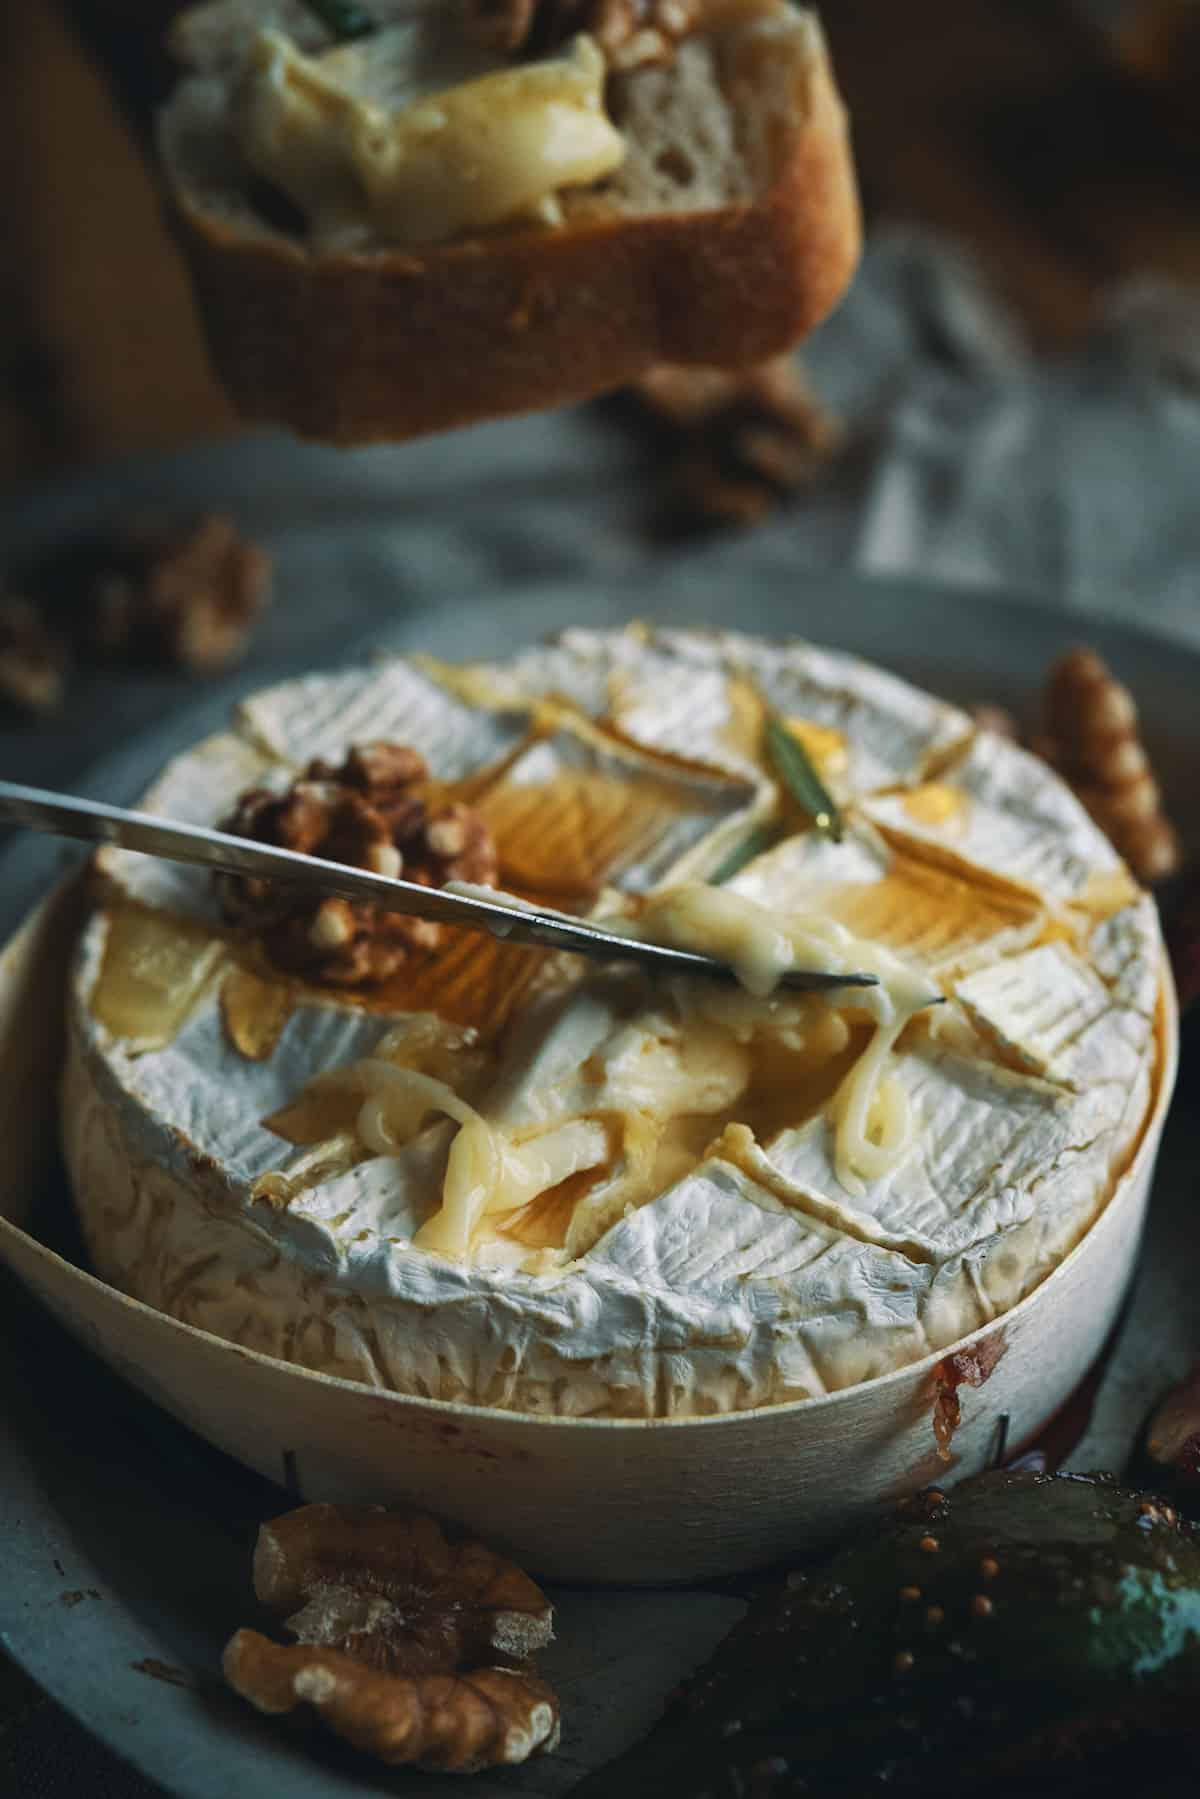 A knife scooping melted camembert cheese.